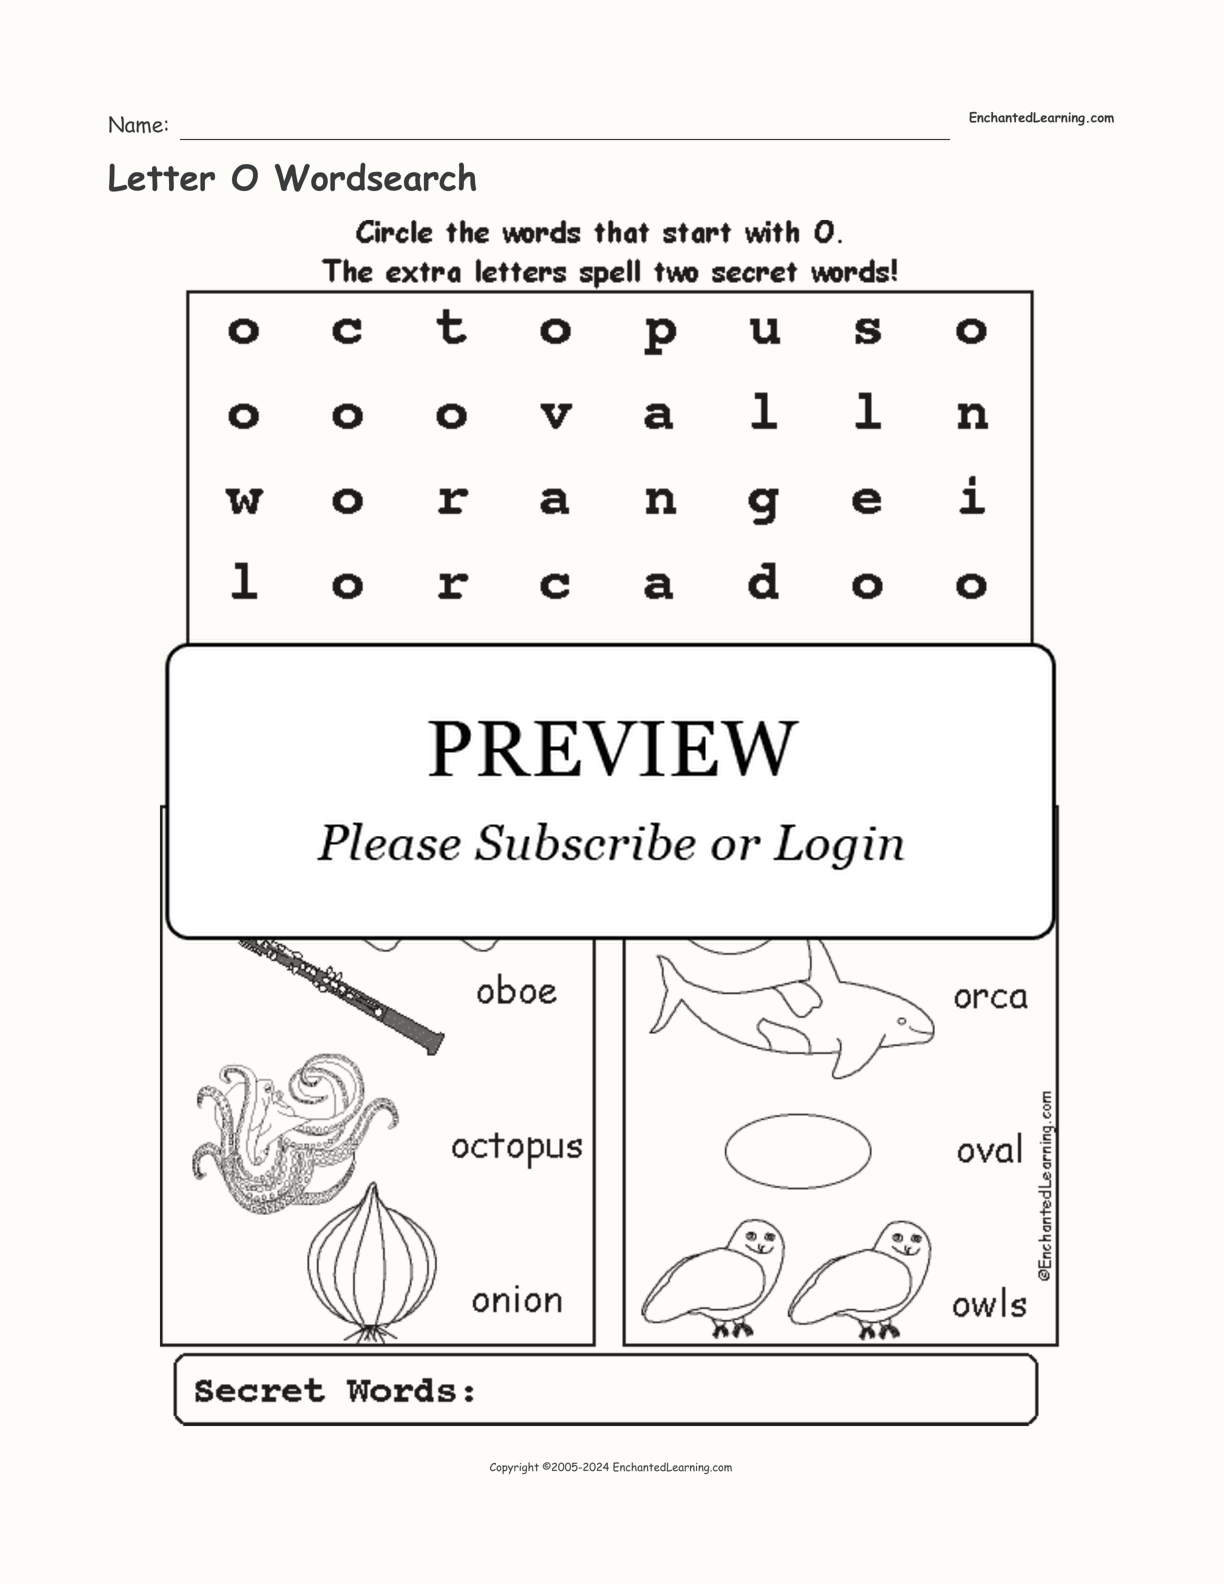 Letter O Wordsearch interactive worksheet page 1